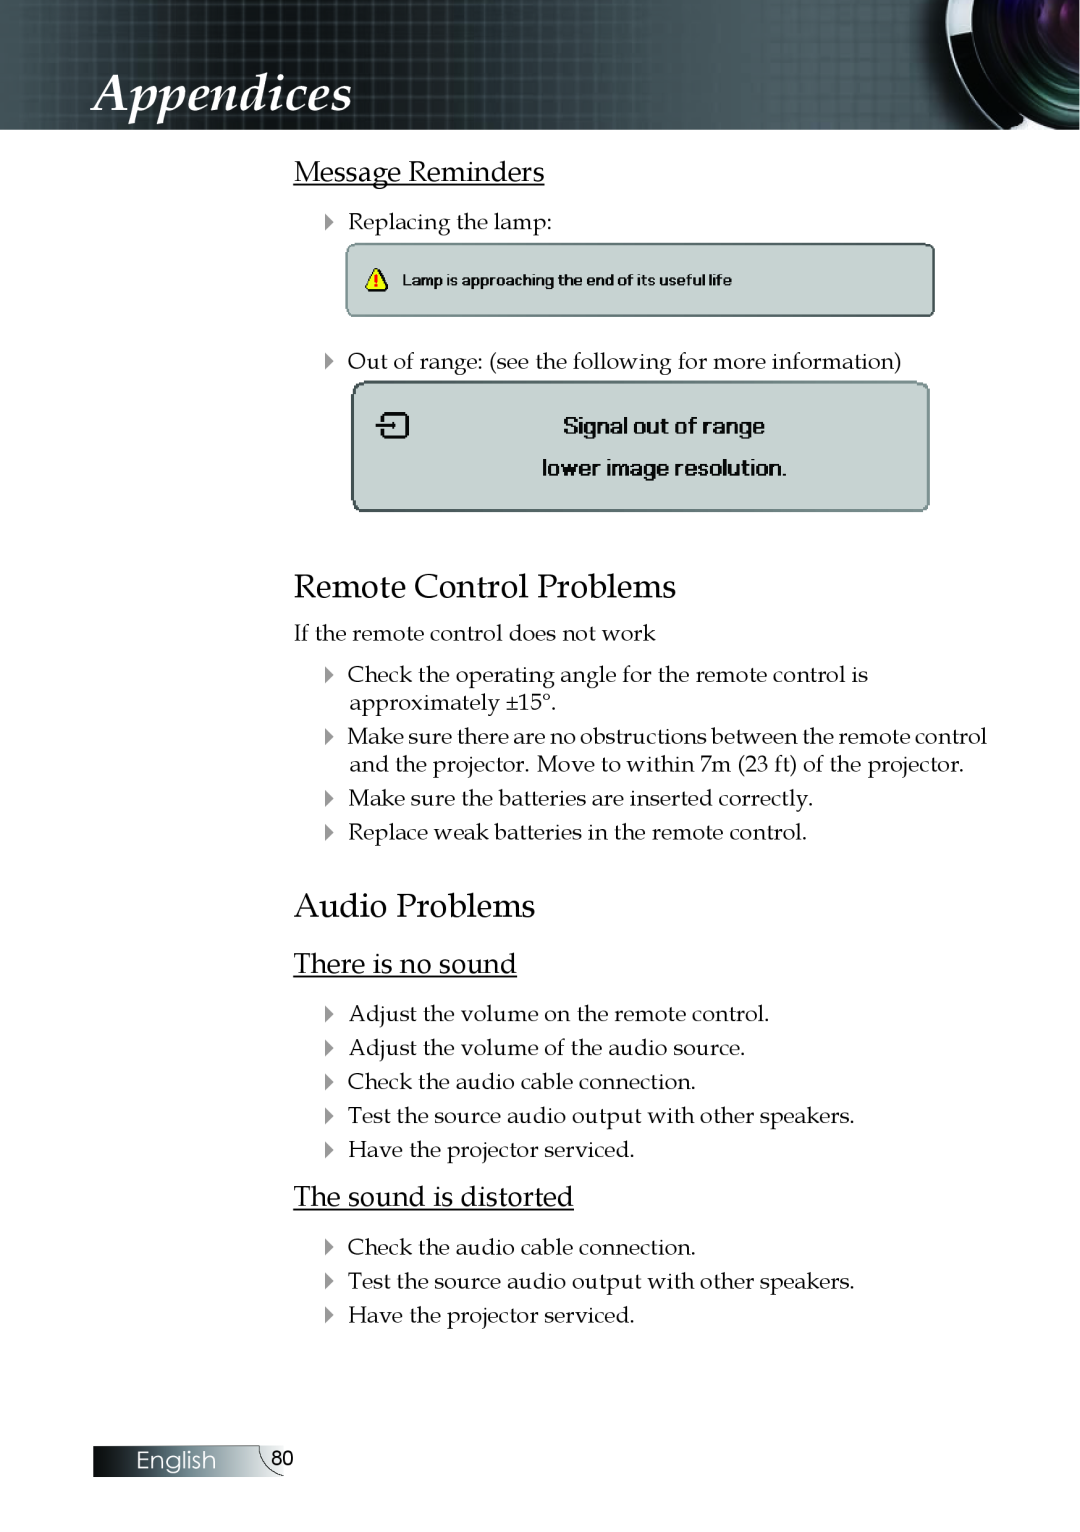 Optoma Technology EH505 Remote Control Problems, Audio Problems, Message Reminders, There is no sound, Appendices, English 